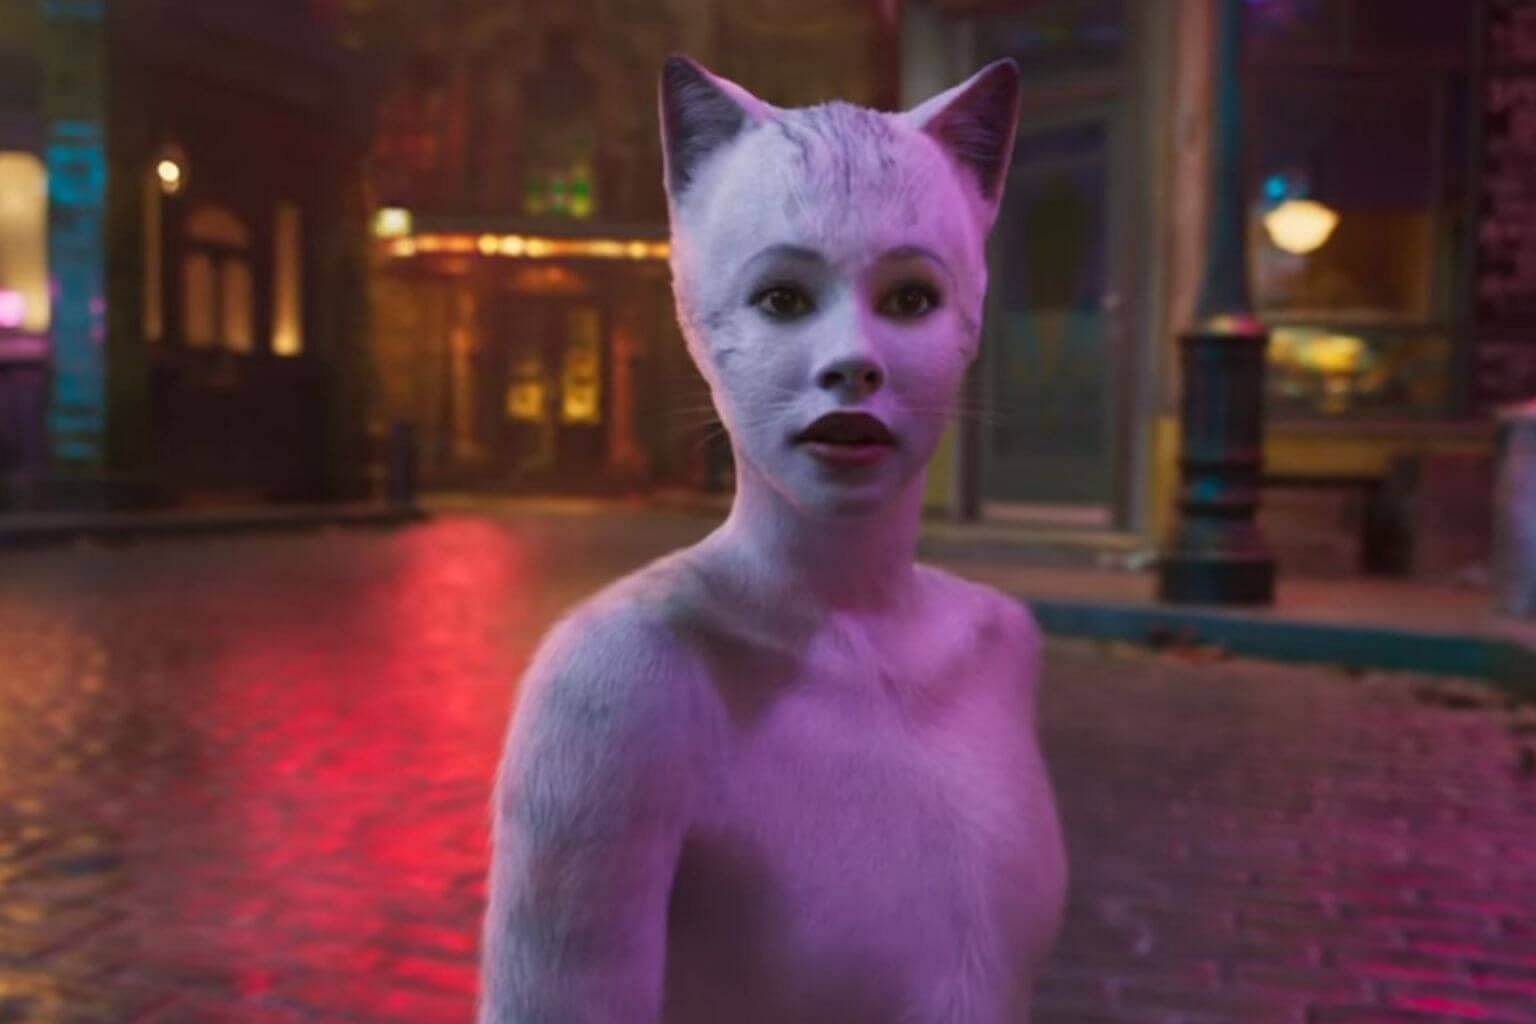 Cats Movie Trailer Brings Out The Claws Entertainment News Top Stories The Straits Times